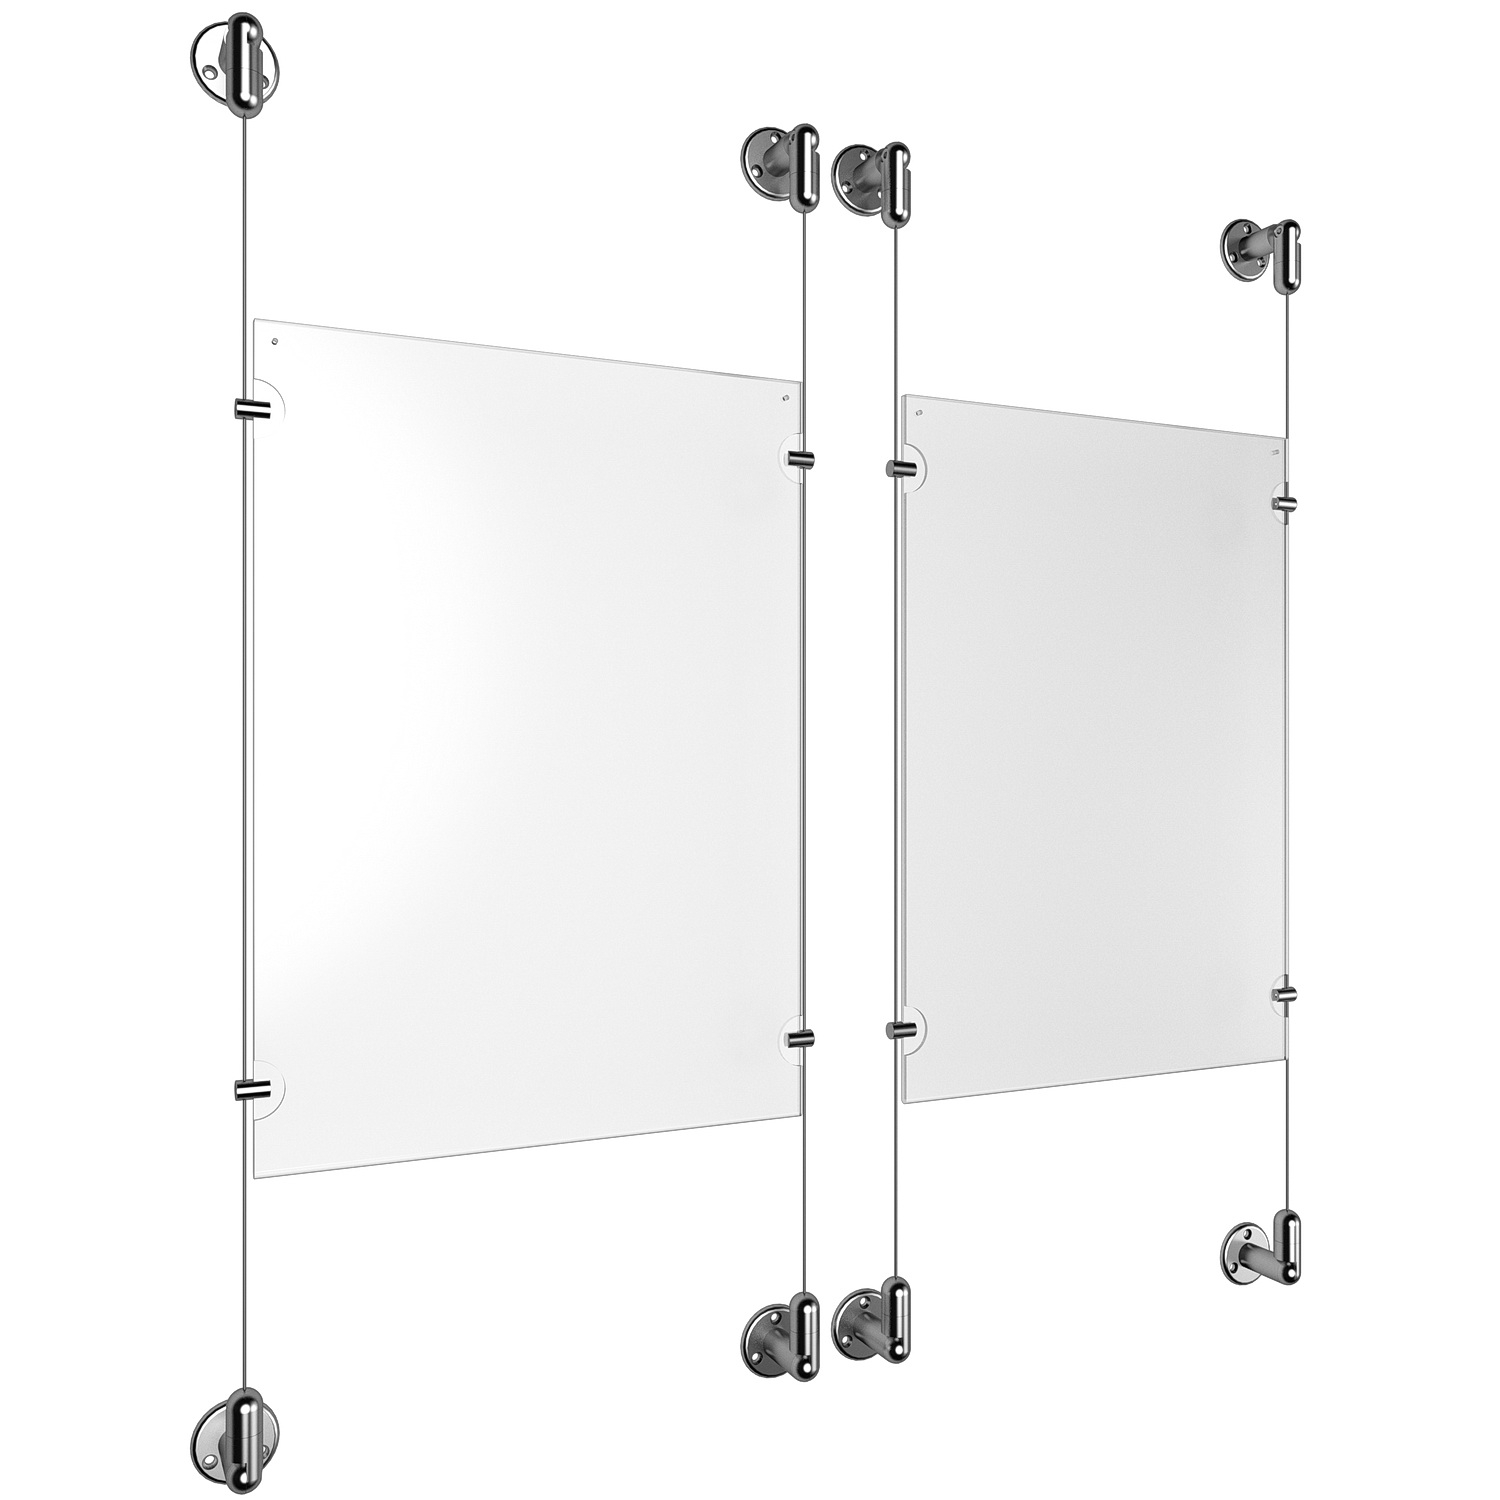 (2) 11'' Width x 17'' Height Clear Acrylic Frame & (4) Aluminum Clear Anodized Adjustable Angle Cable Systems with (8) Single-Sided Panel Grippers